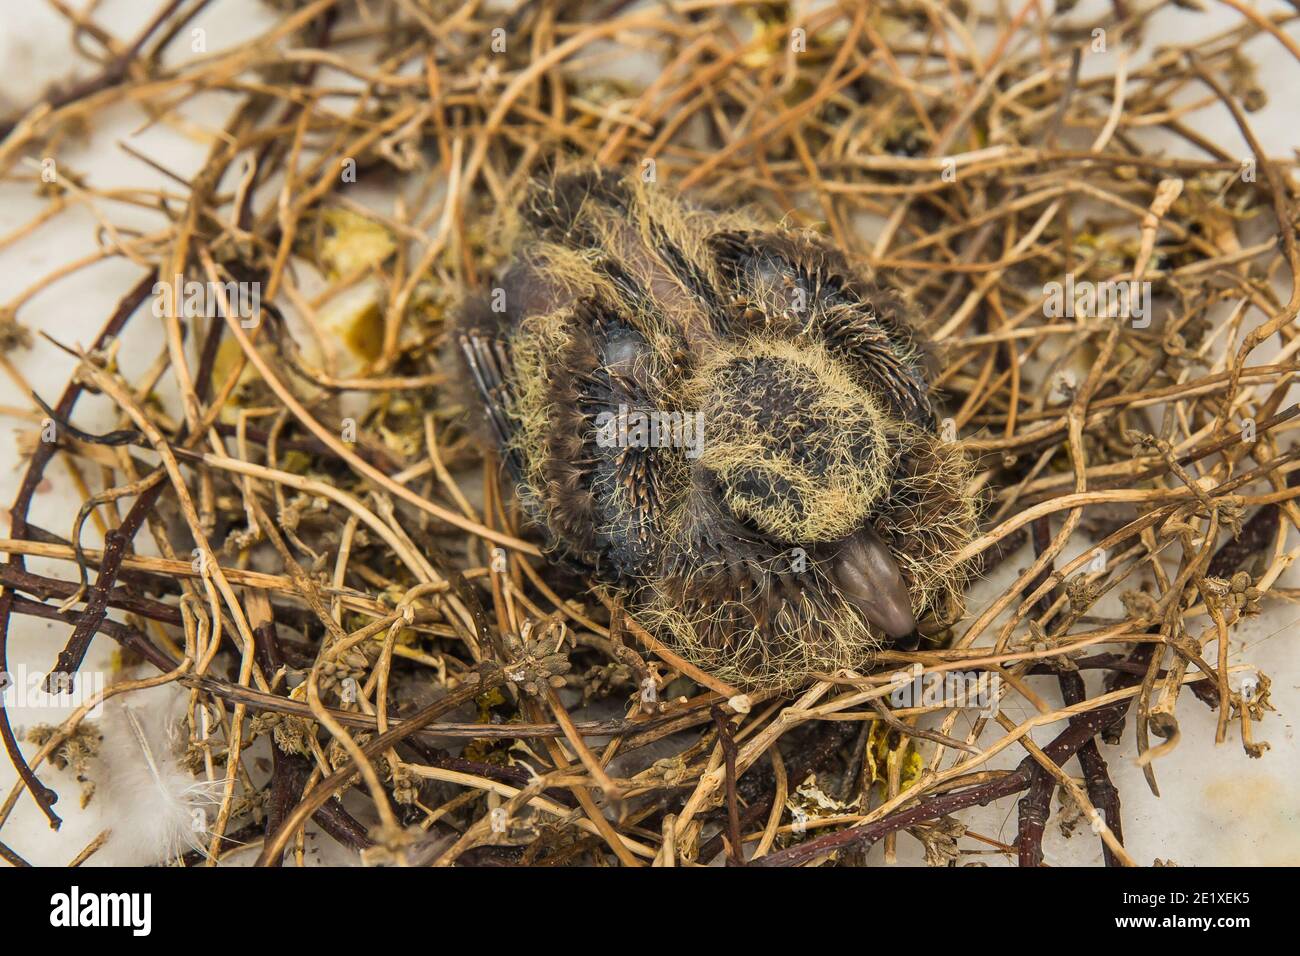 Squab (baby dove) in bird's nest waiting for its parents to bring food. Black and yellow feathers emerging from dove chick. Stock Photo